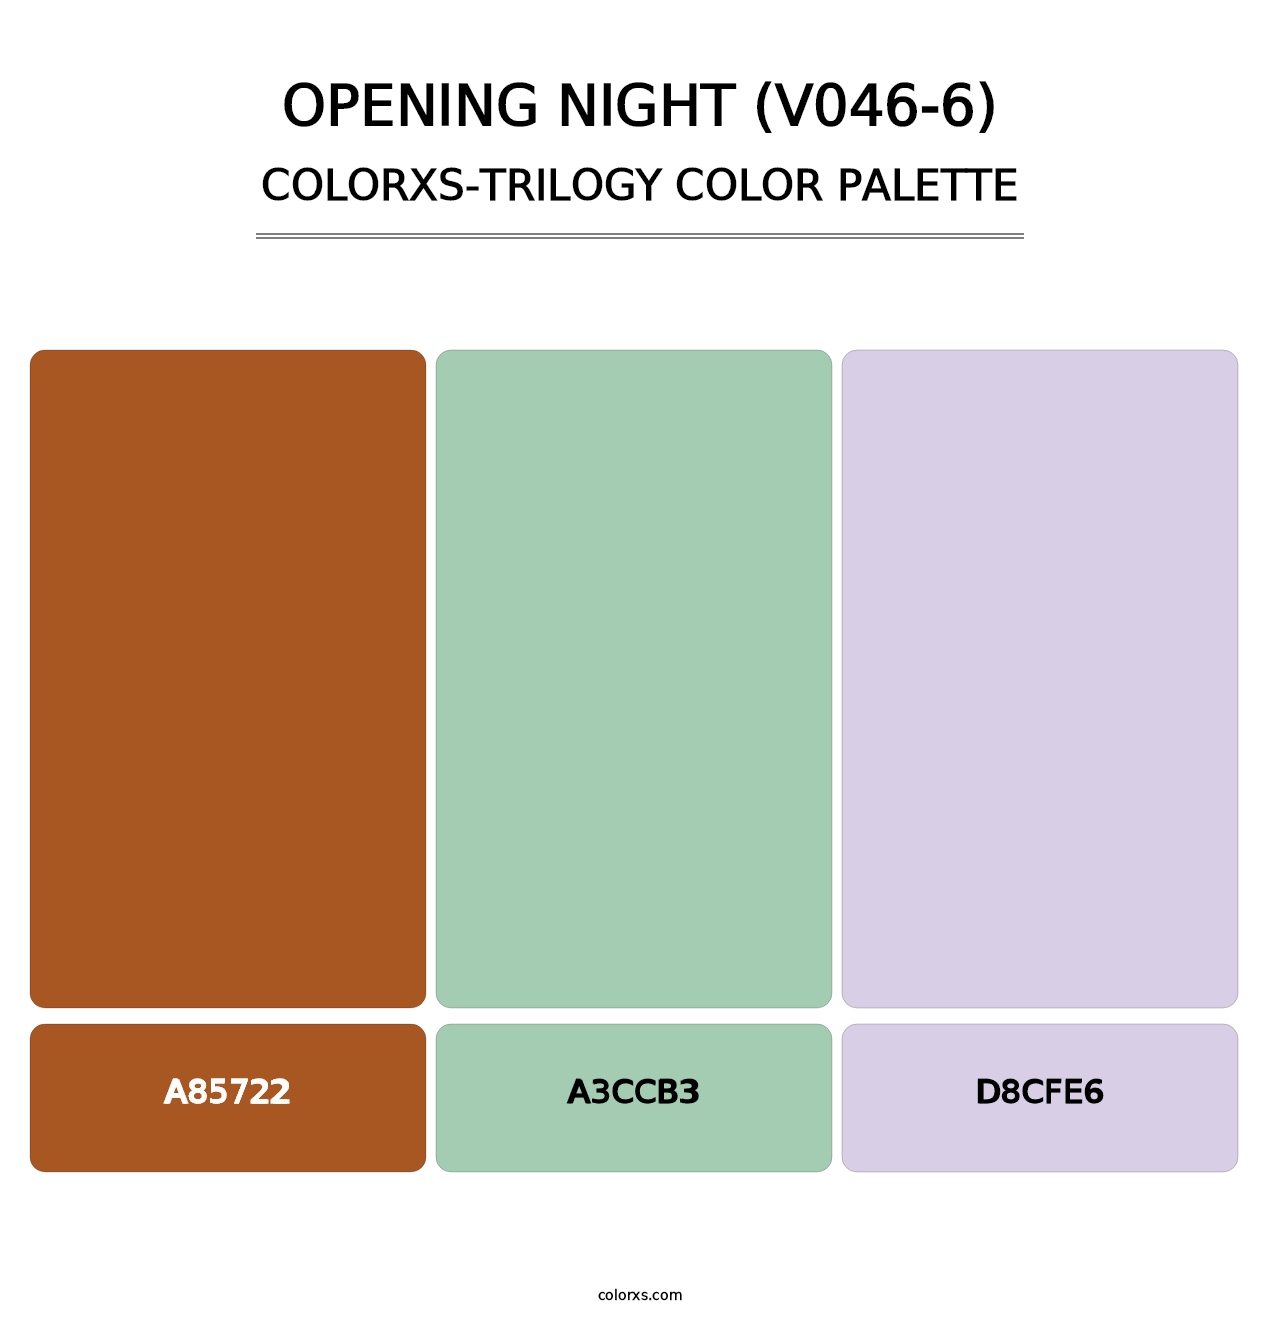 Opening Night (V046-6) - Colorxs Trilogy Palette